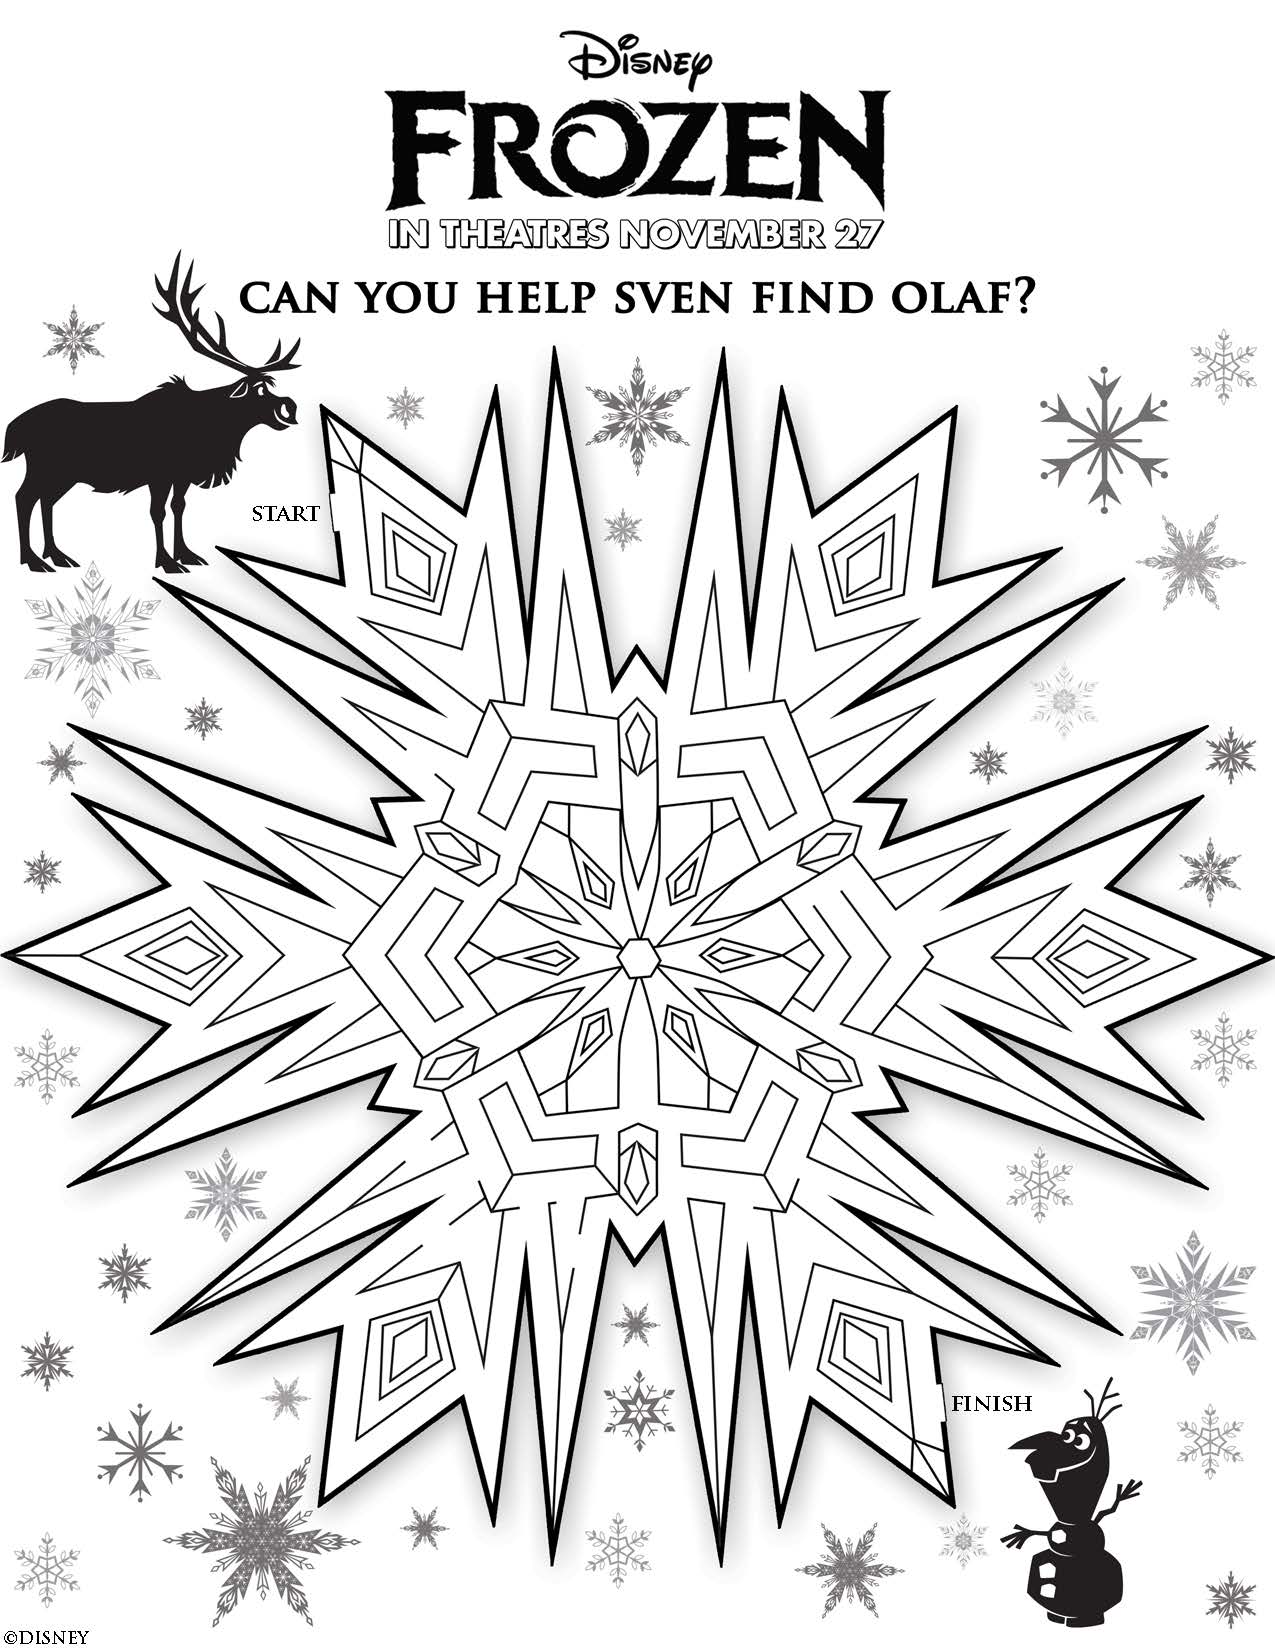 Disney's Frozen Printables, Coloring Pages, and Storybook App